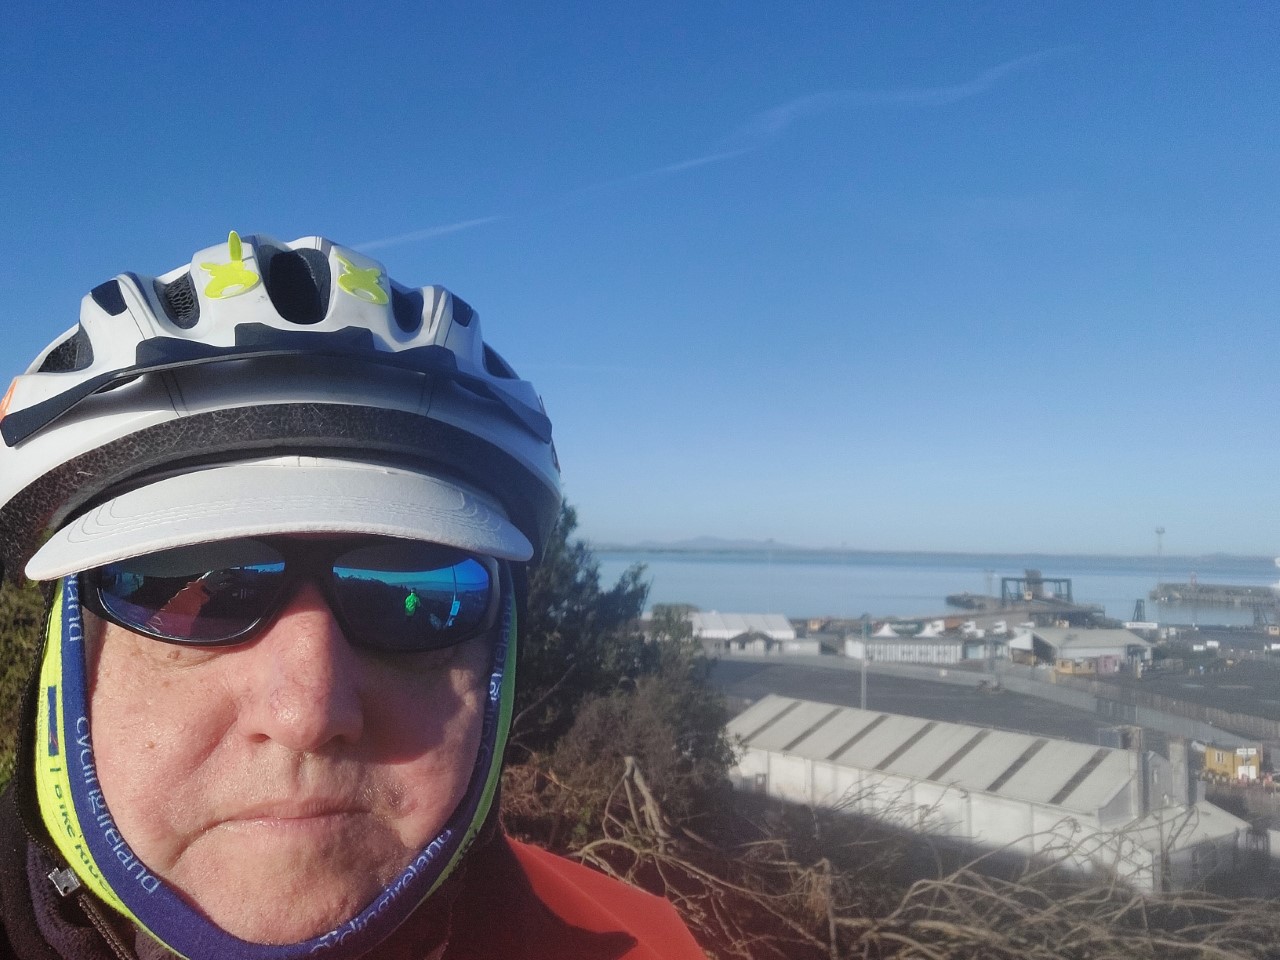 Solo Ride February 22nd - 28 Day Active Challenge